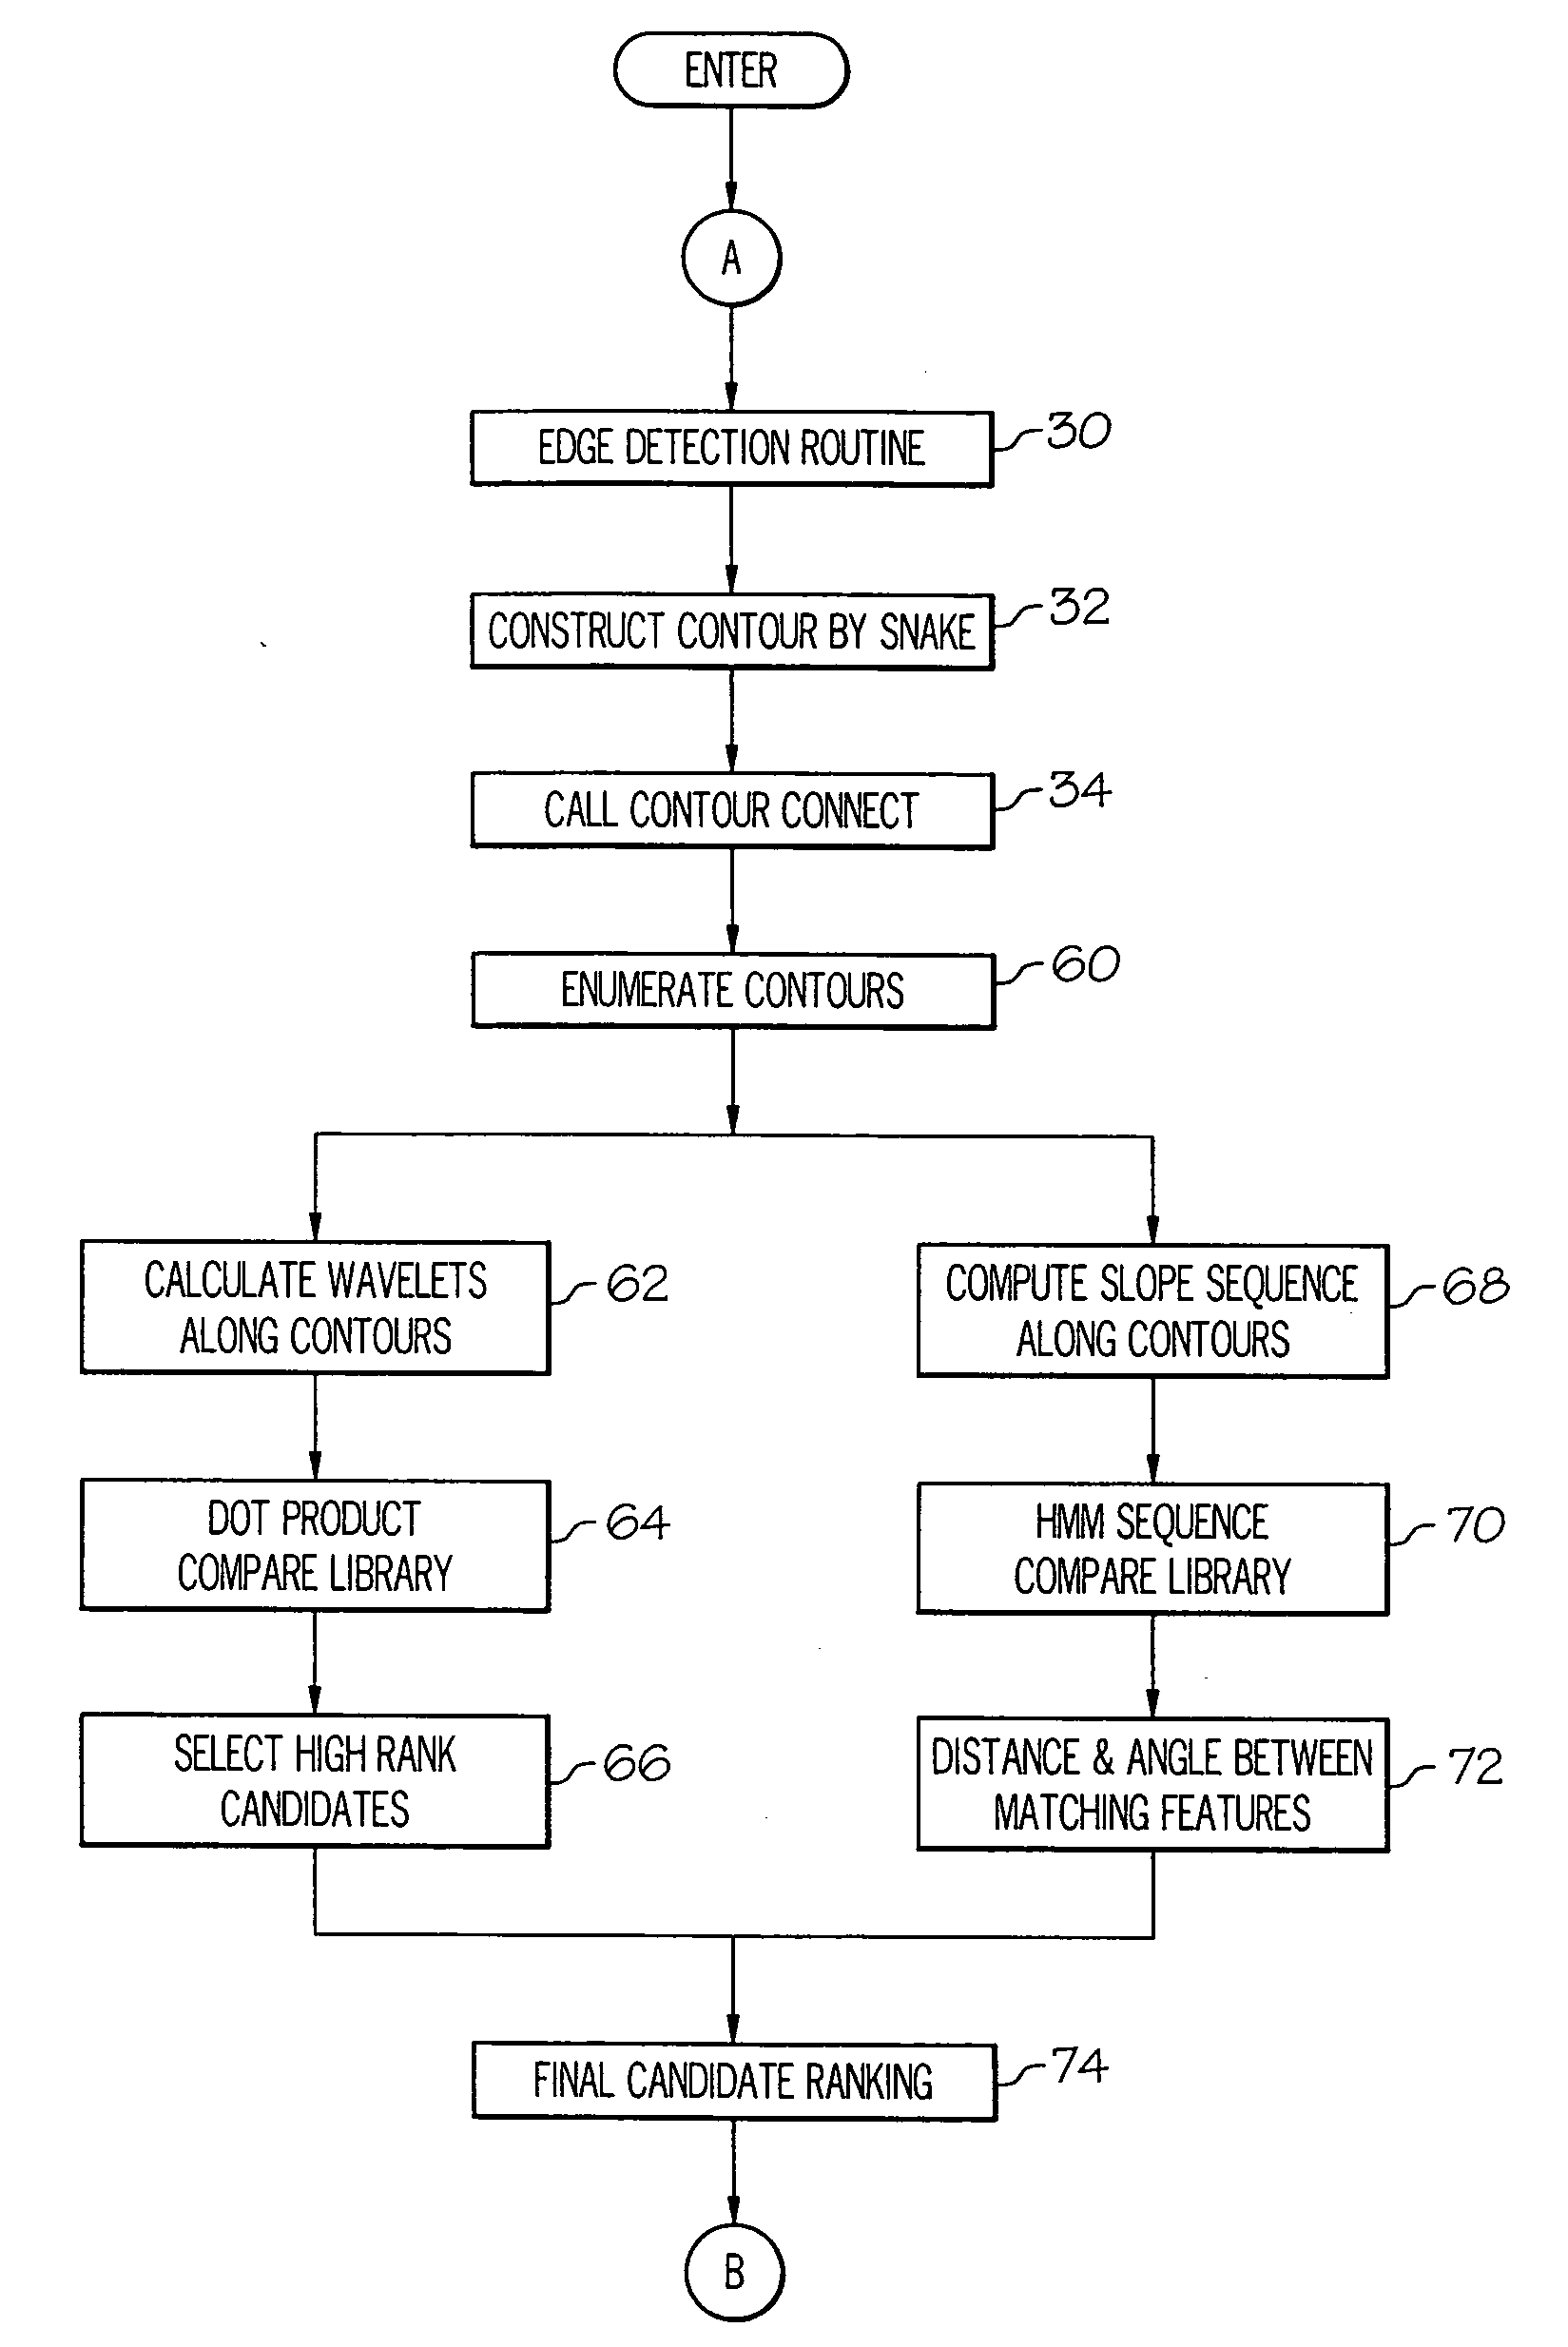 Coutour-based object recognition method for a monocular vision system